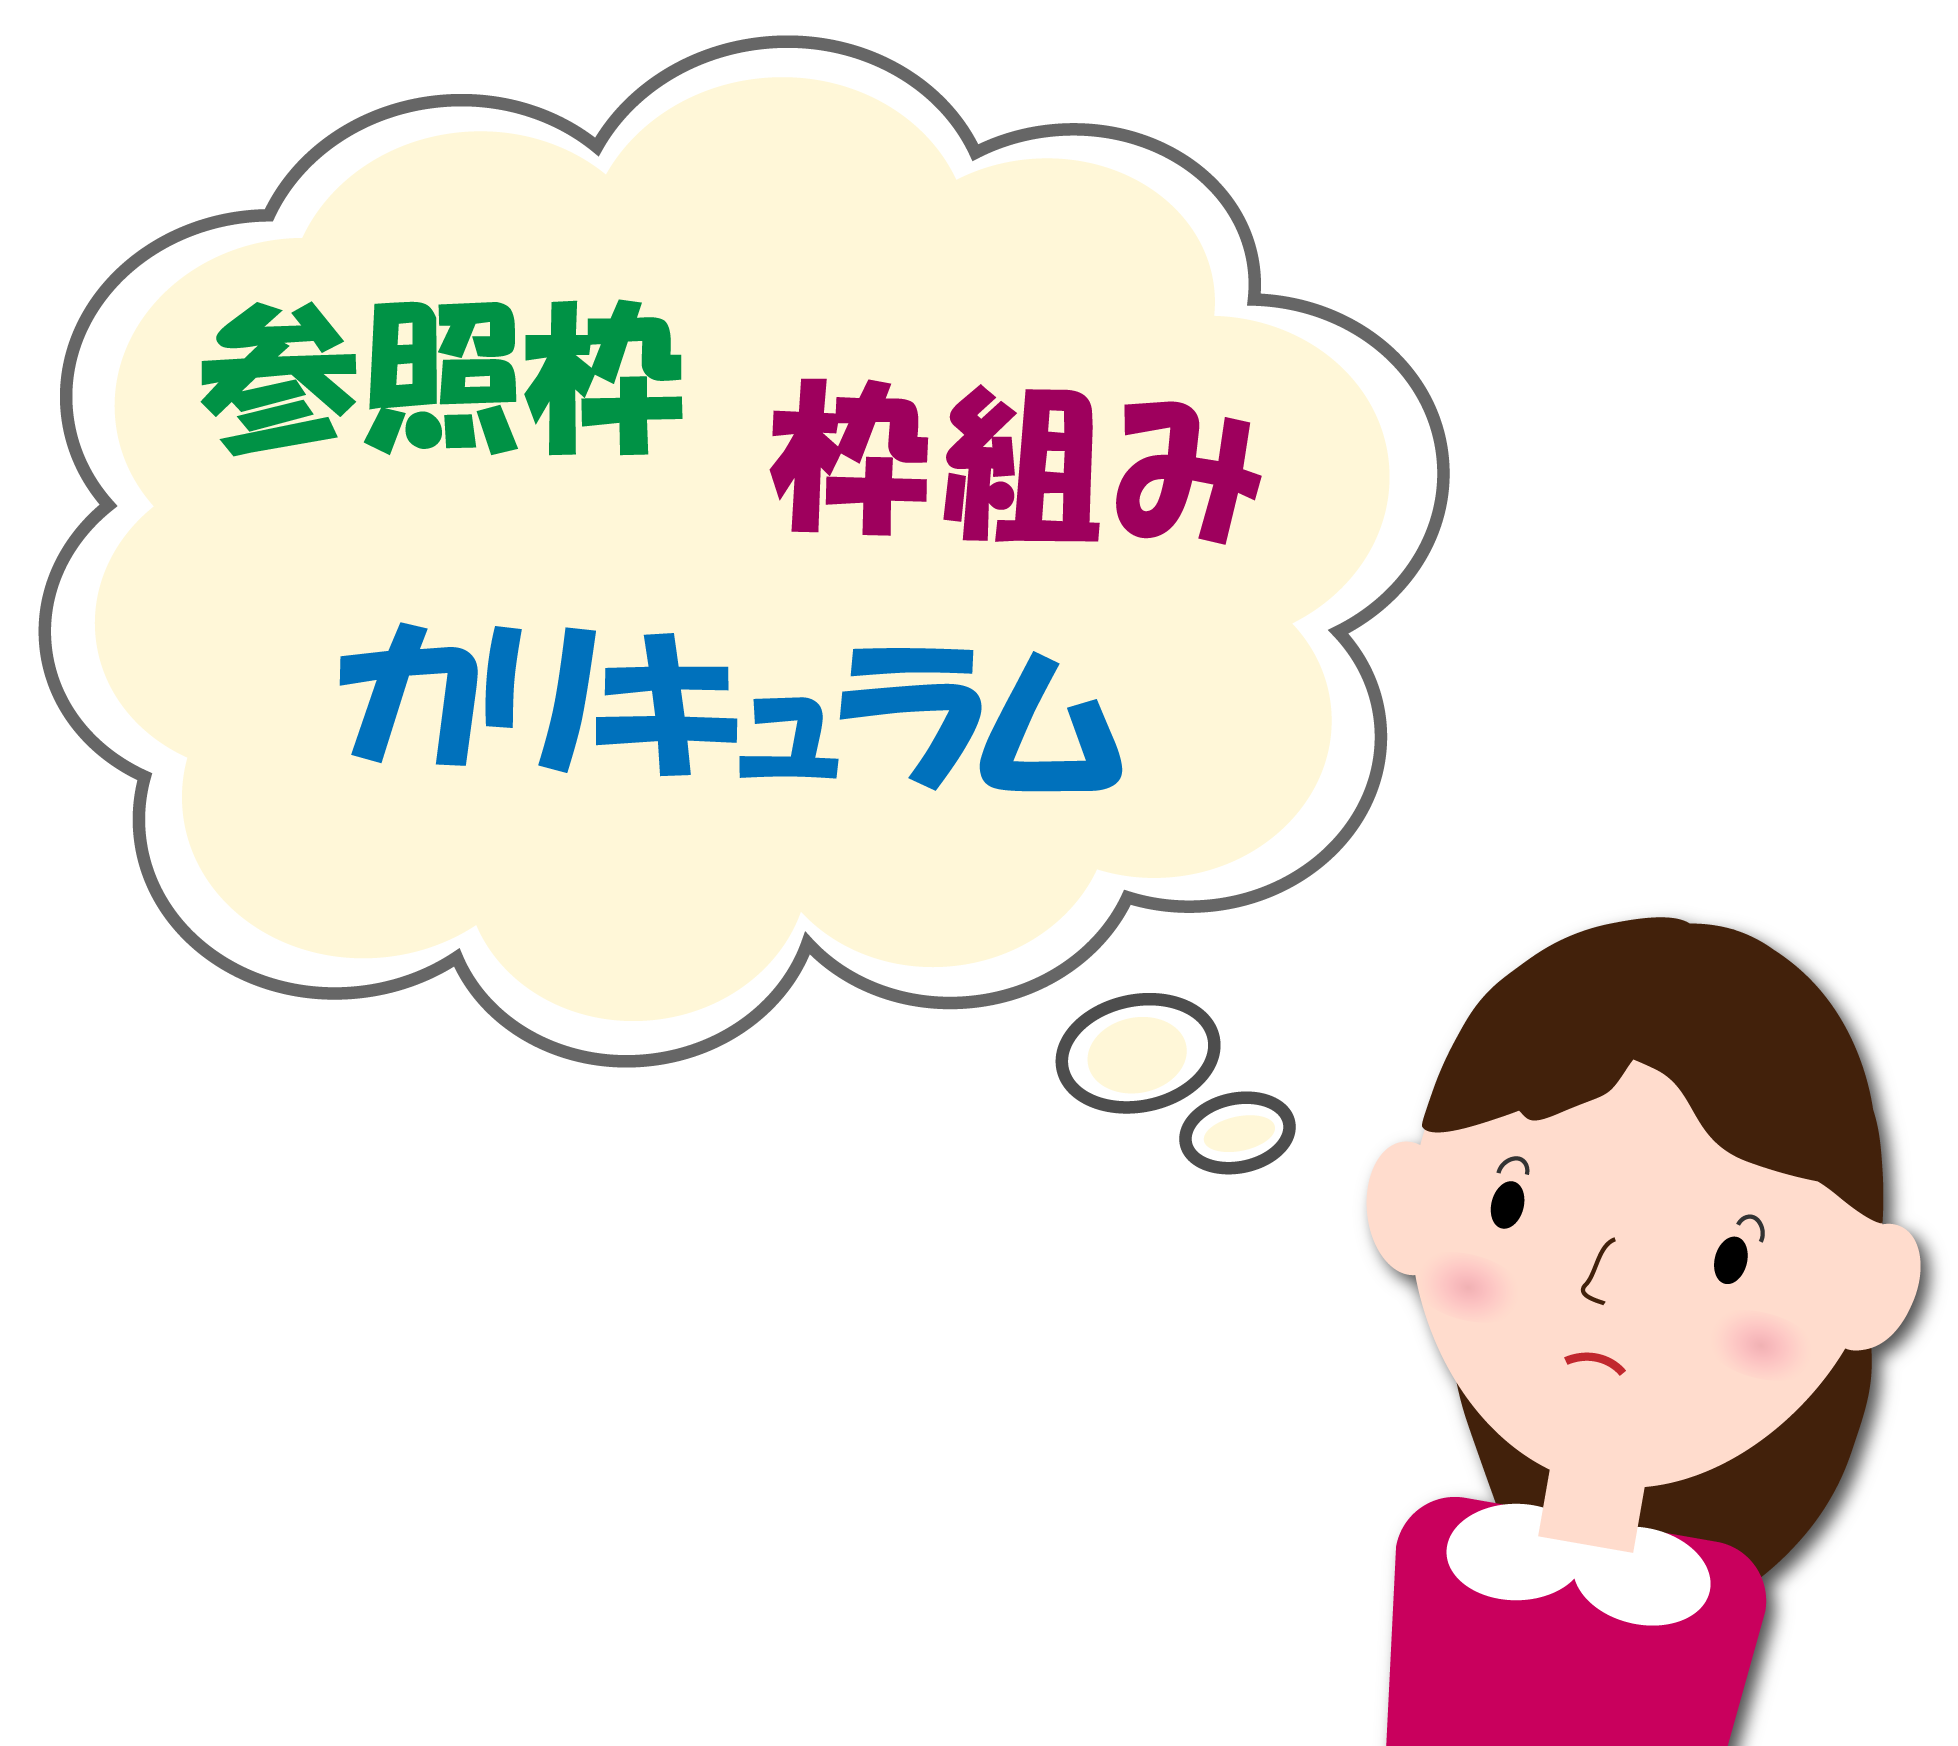 Image of a person thinking of frameworks in Japanese-Language Education